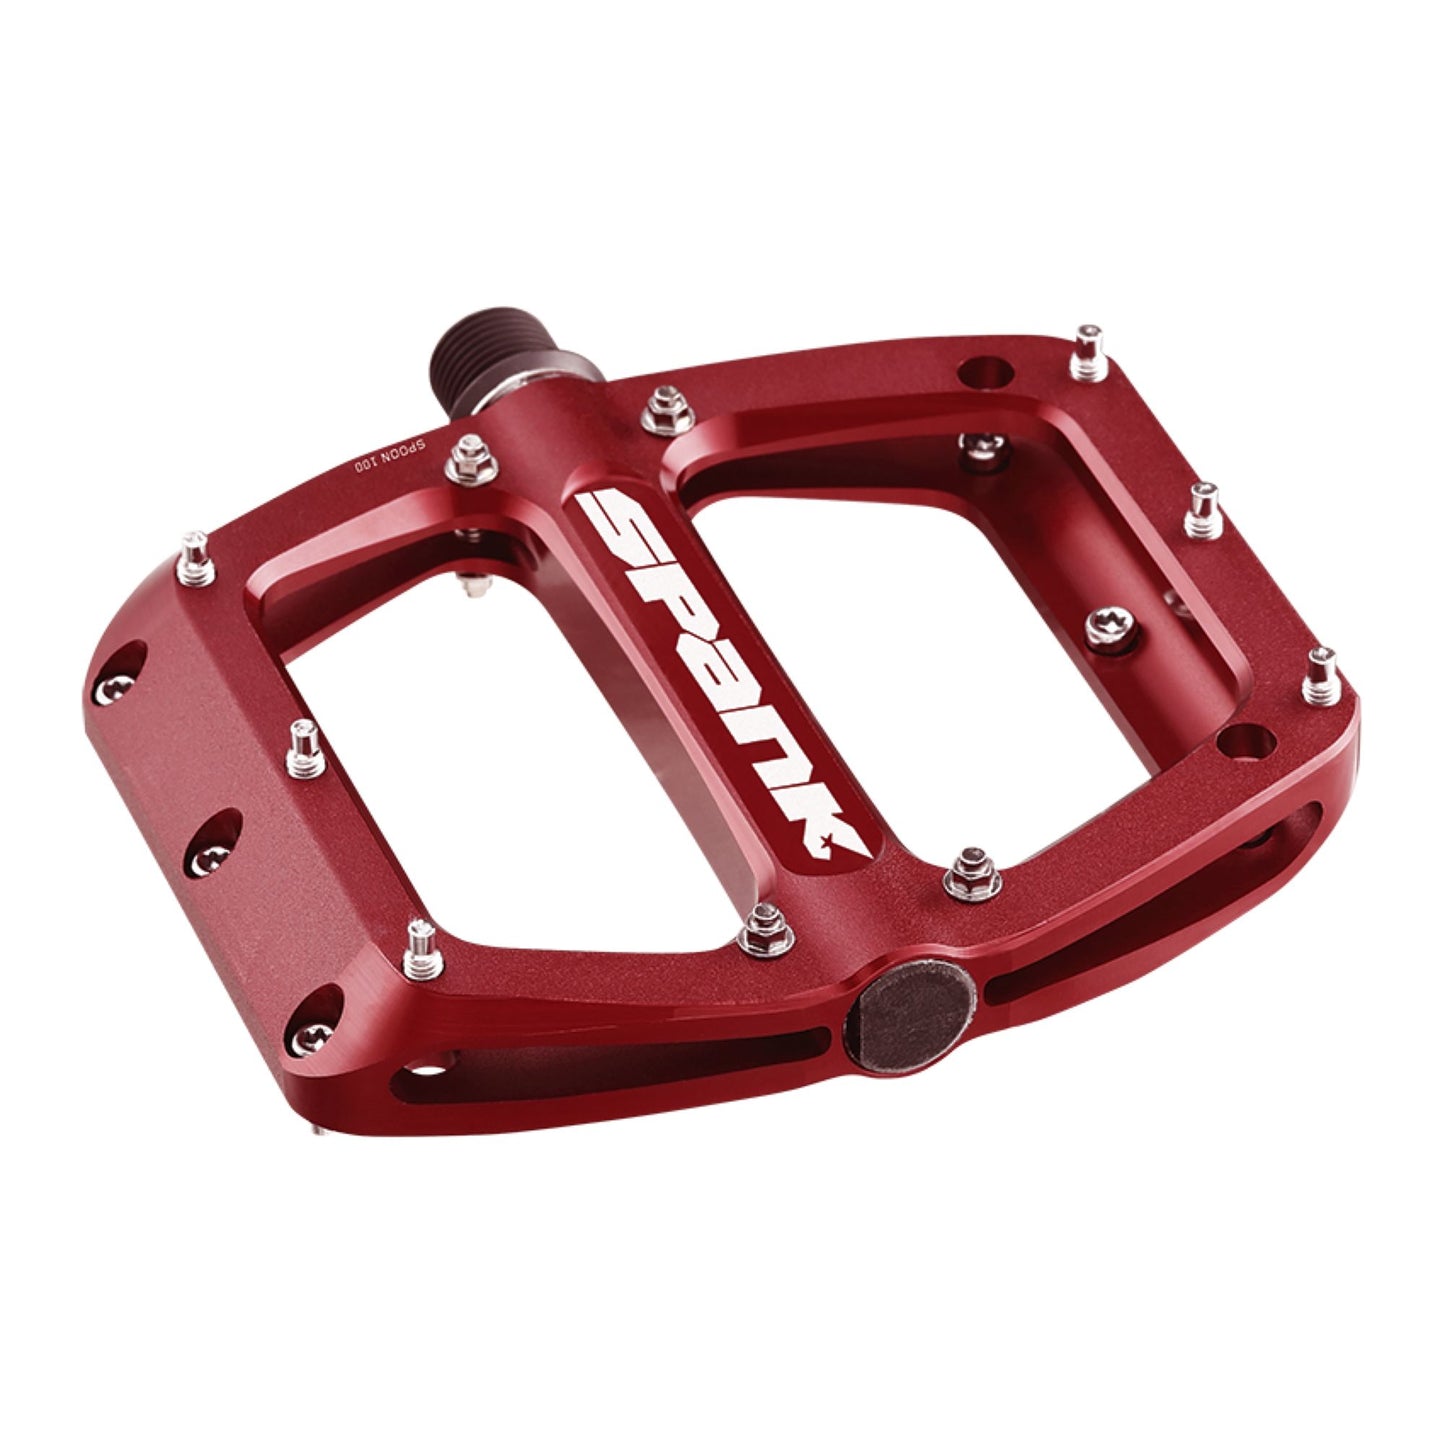 Spank Spoon 90 Pedals Red 90x105mm Pedals